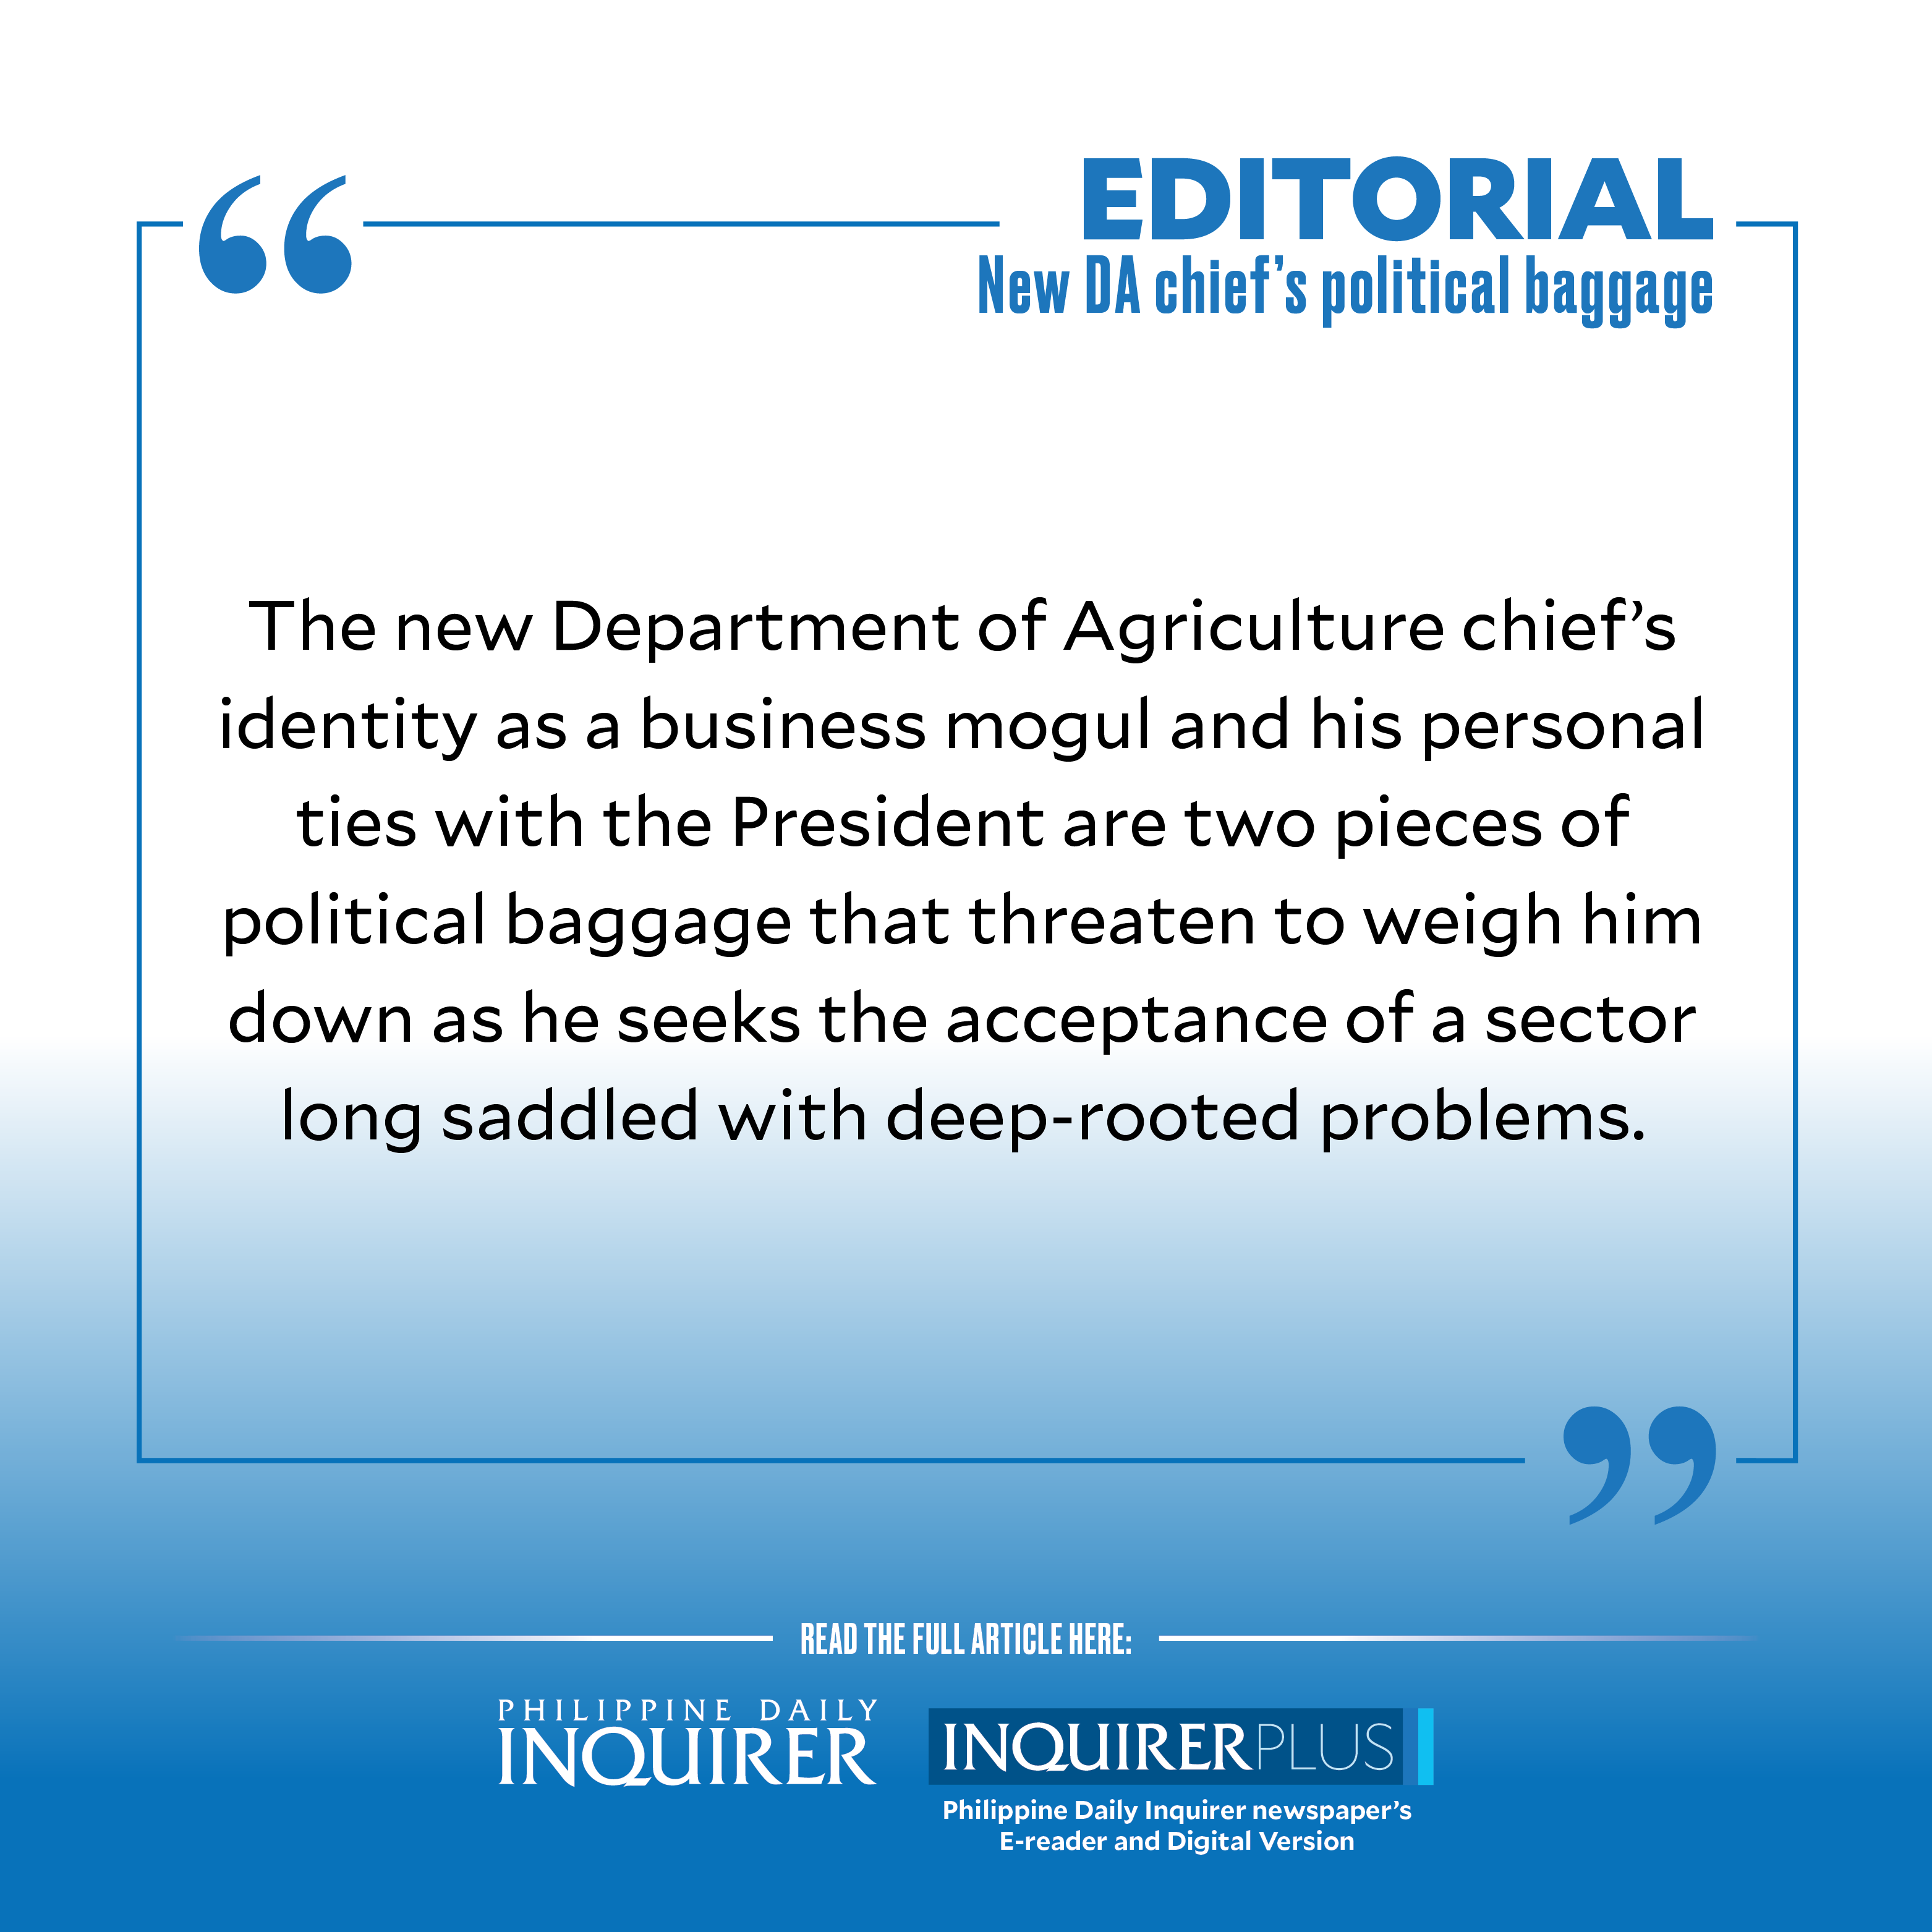 QUOTE CARD FOR EDITORIAL: New DA chief’s political baggage